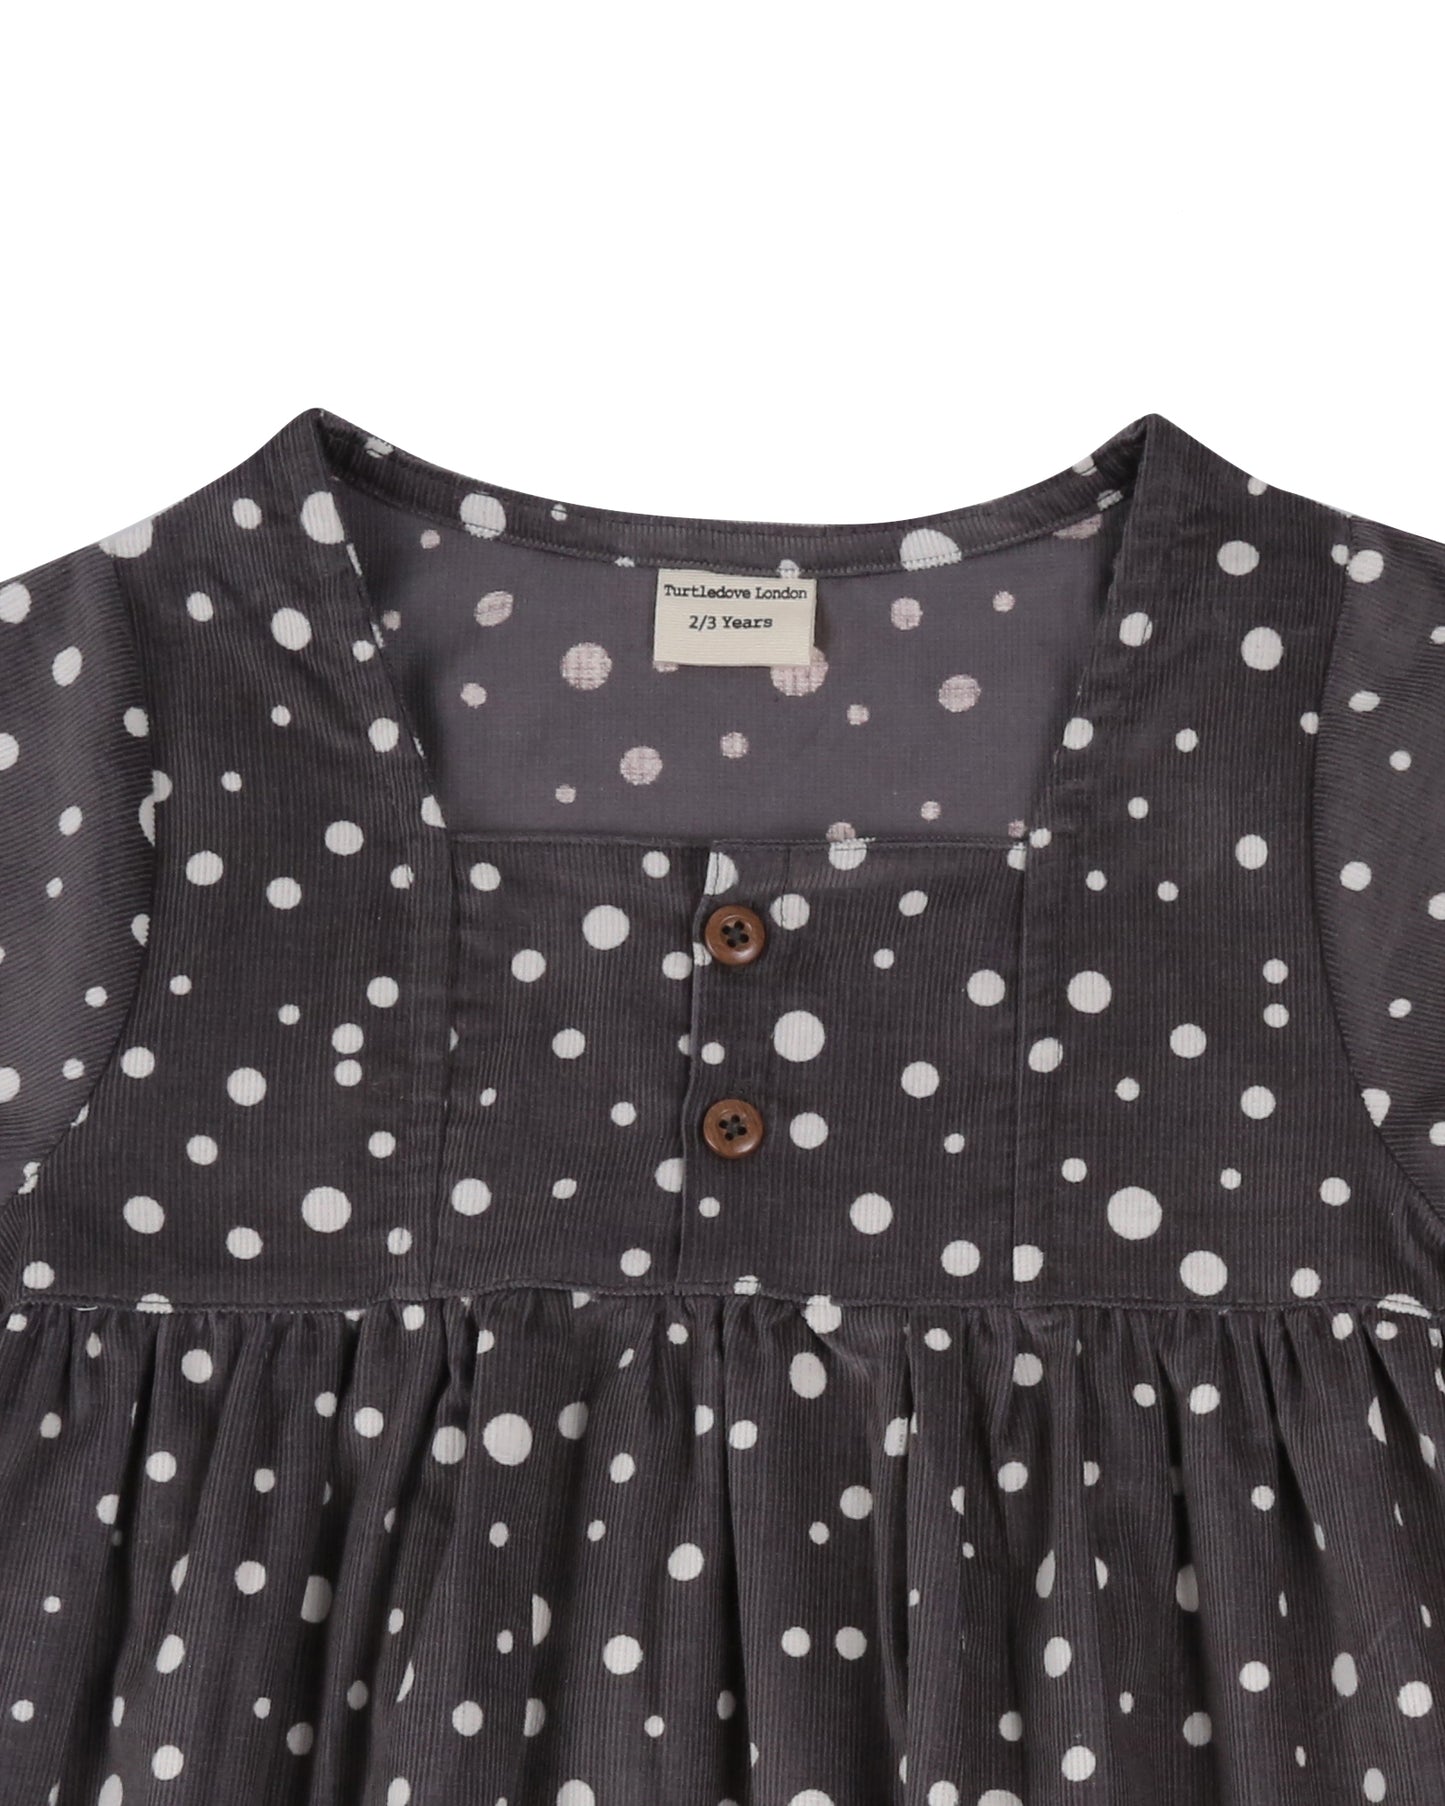 Load image into Gallery viewer, Girls Scatter Dot Print Cord Dress, Turtledove Clothing, Turtledove, Turtledove London, Organic Kidswear, Turtledove Kidswear, Girls Party Dresses, Turtledove Stockist, Nottinghamshire Stockist, Midlands Baby Store, Sustainable Children’s Clothing, Girls Clothes
